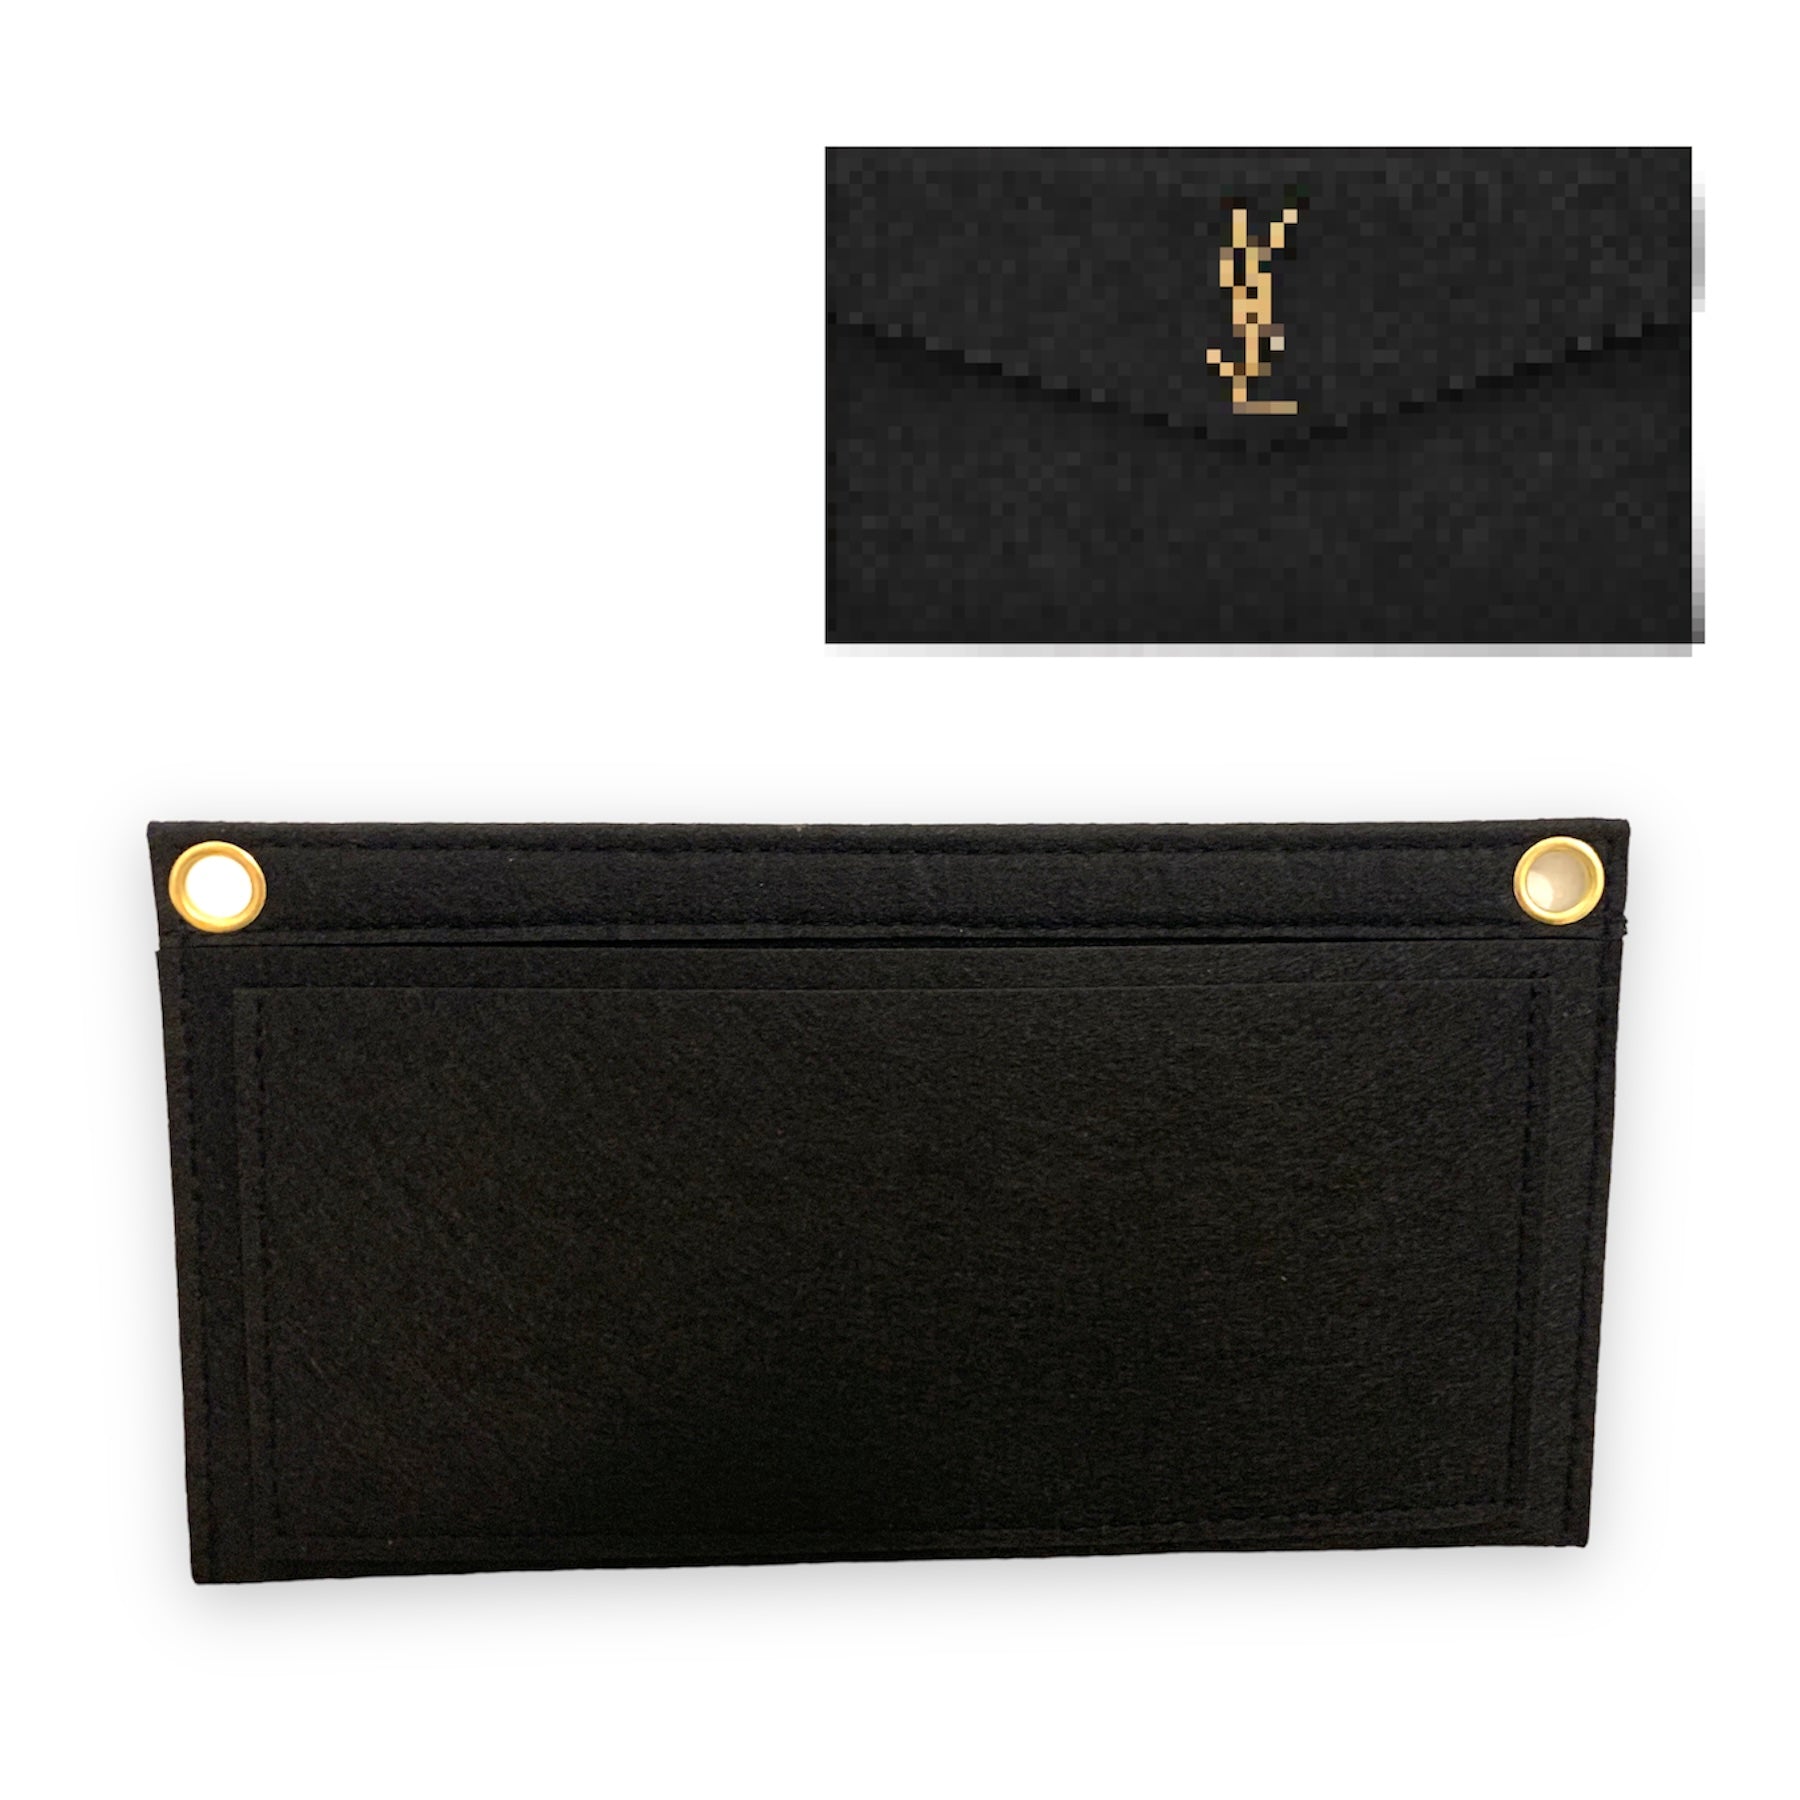 New Design Conversion Kit for LV Toiletry Pouch 26 / 19 Insert Liner  Organizer Conversion Kit With Zip Free UK Delivery 